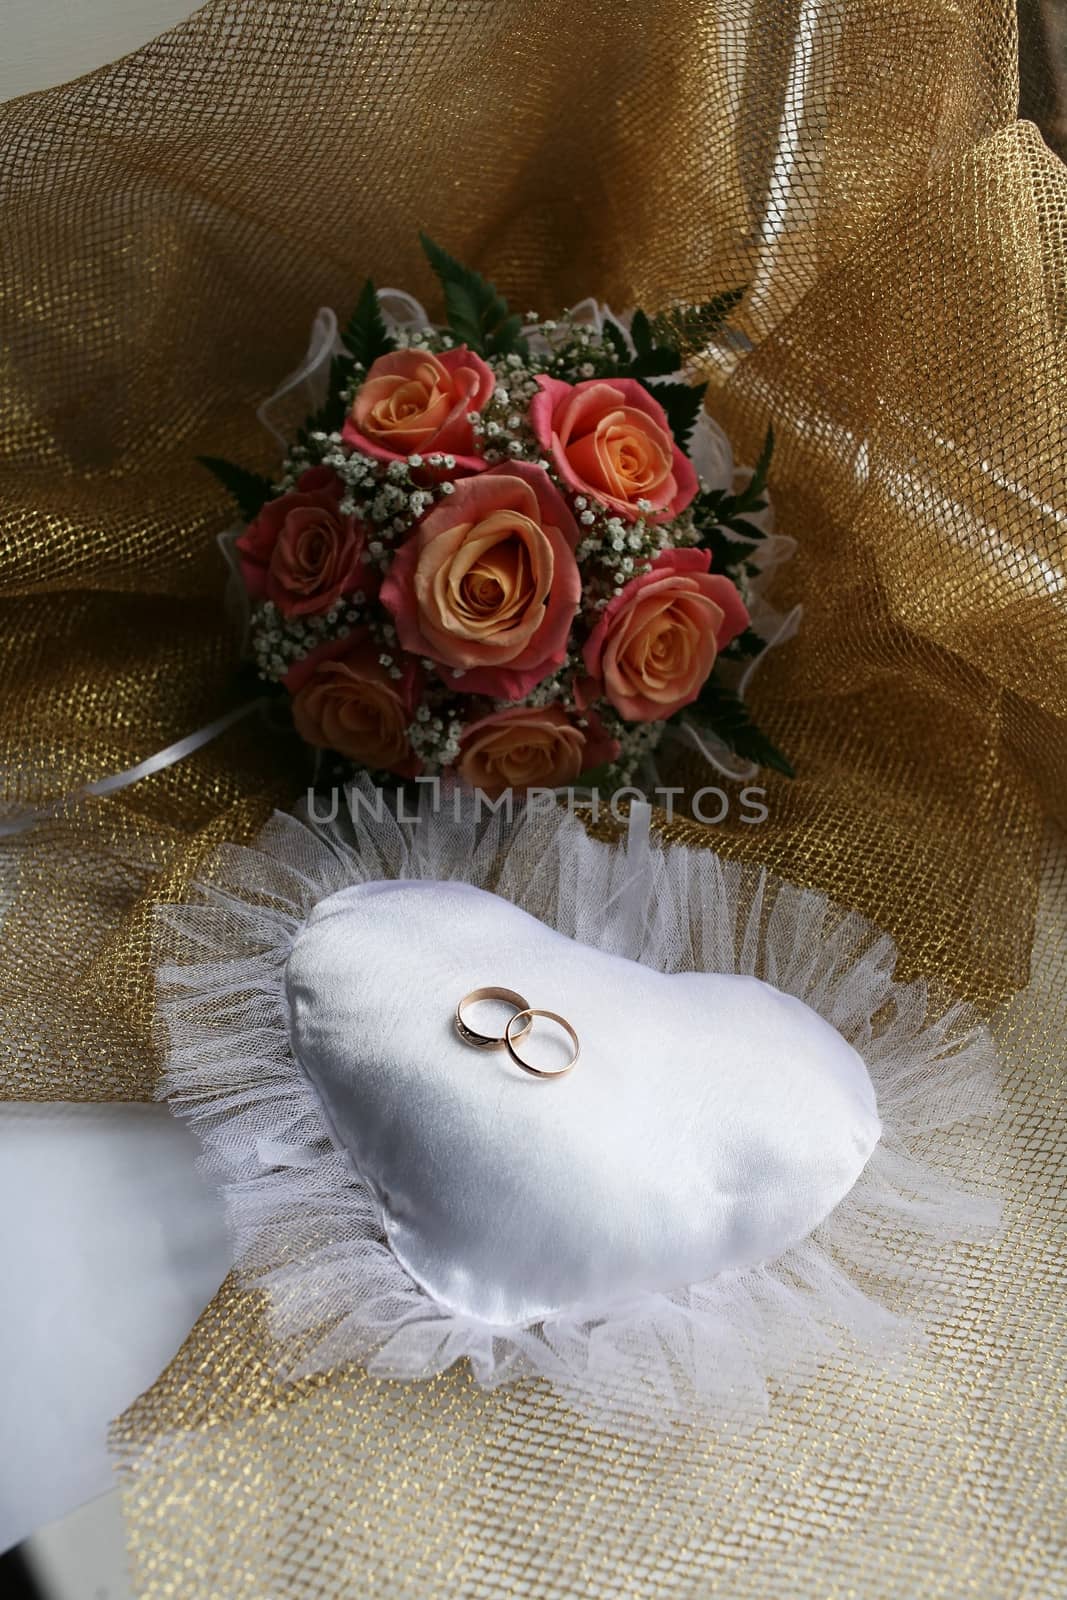 Wedding rings and bouquet by Krakatuk